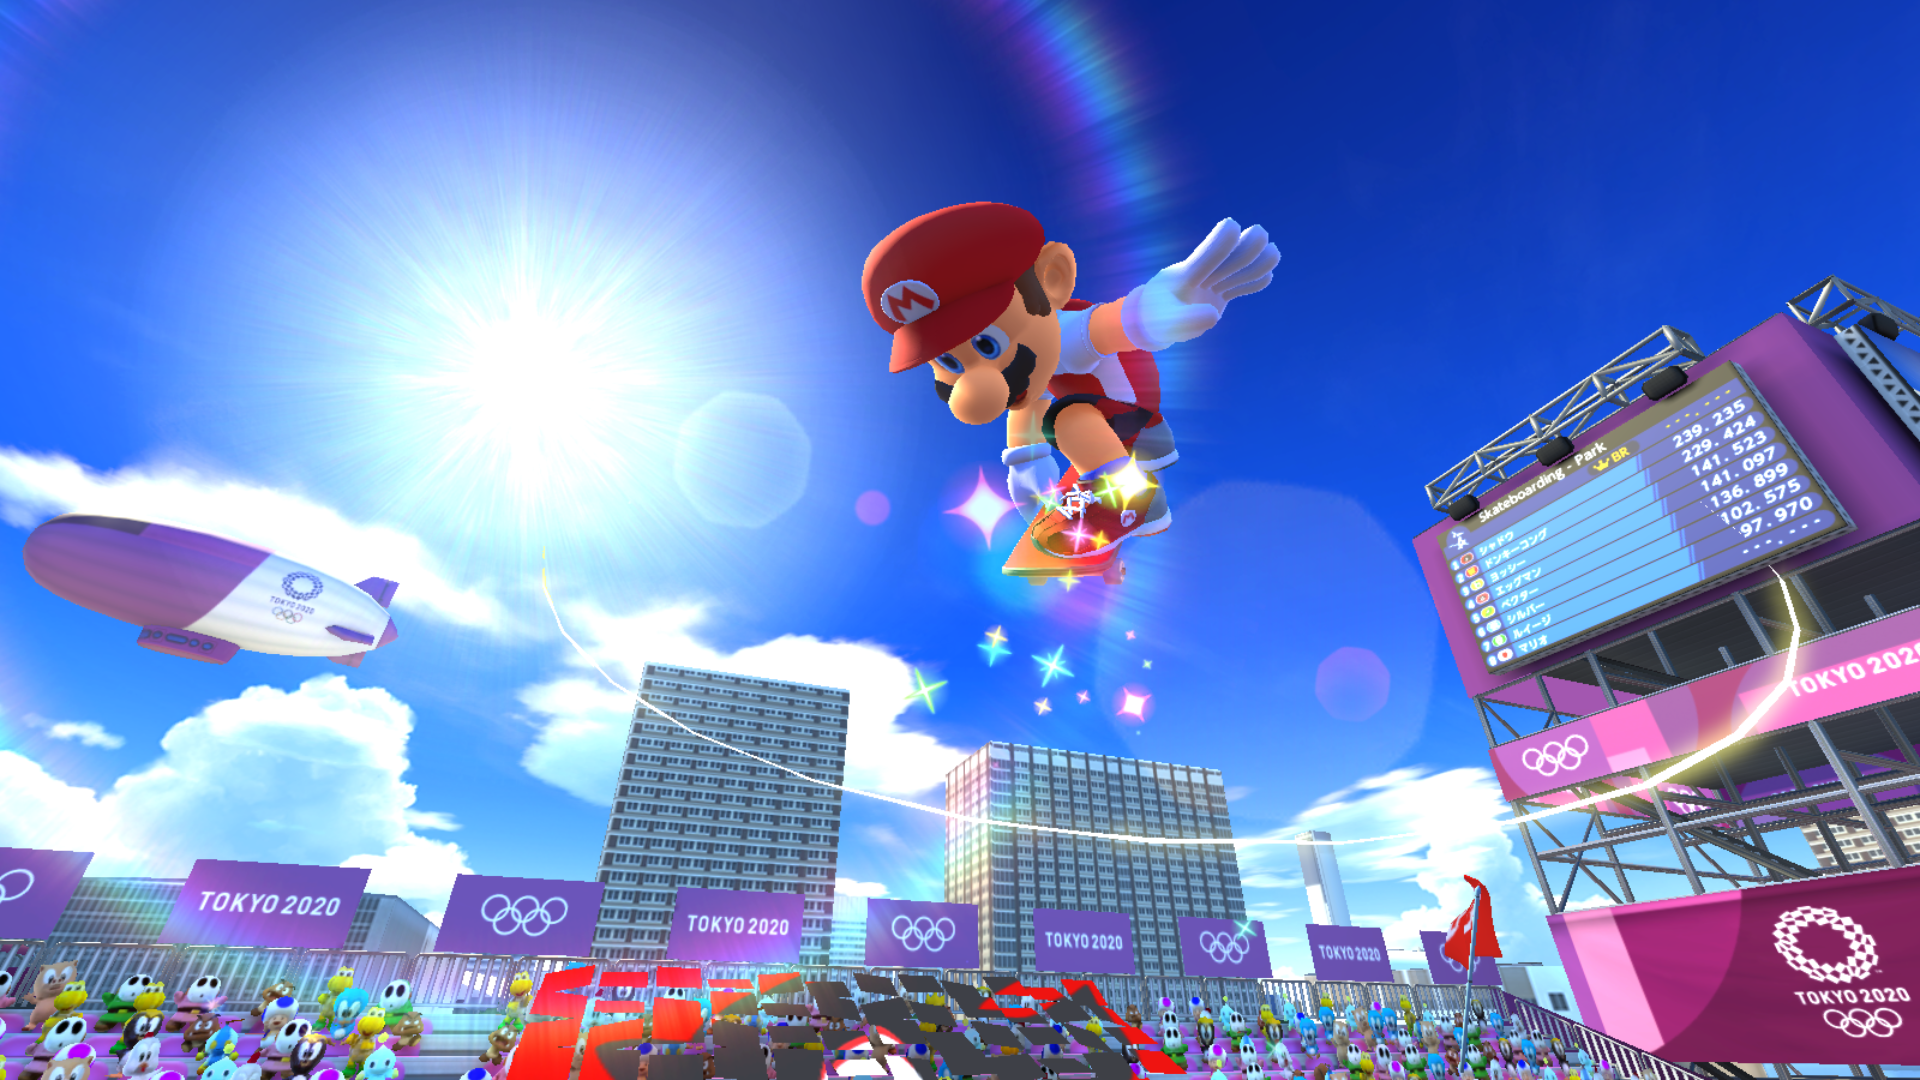 Mario & Sonic at the Olympic Games: Tokyo 2020 - Nintendo Switch - image 5 of 8